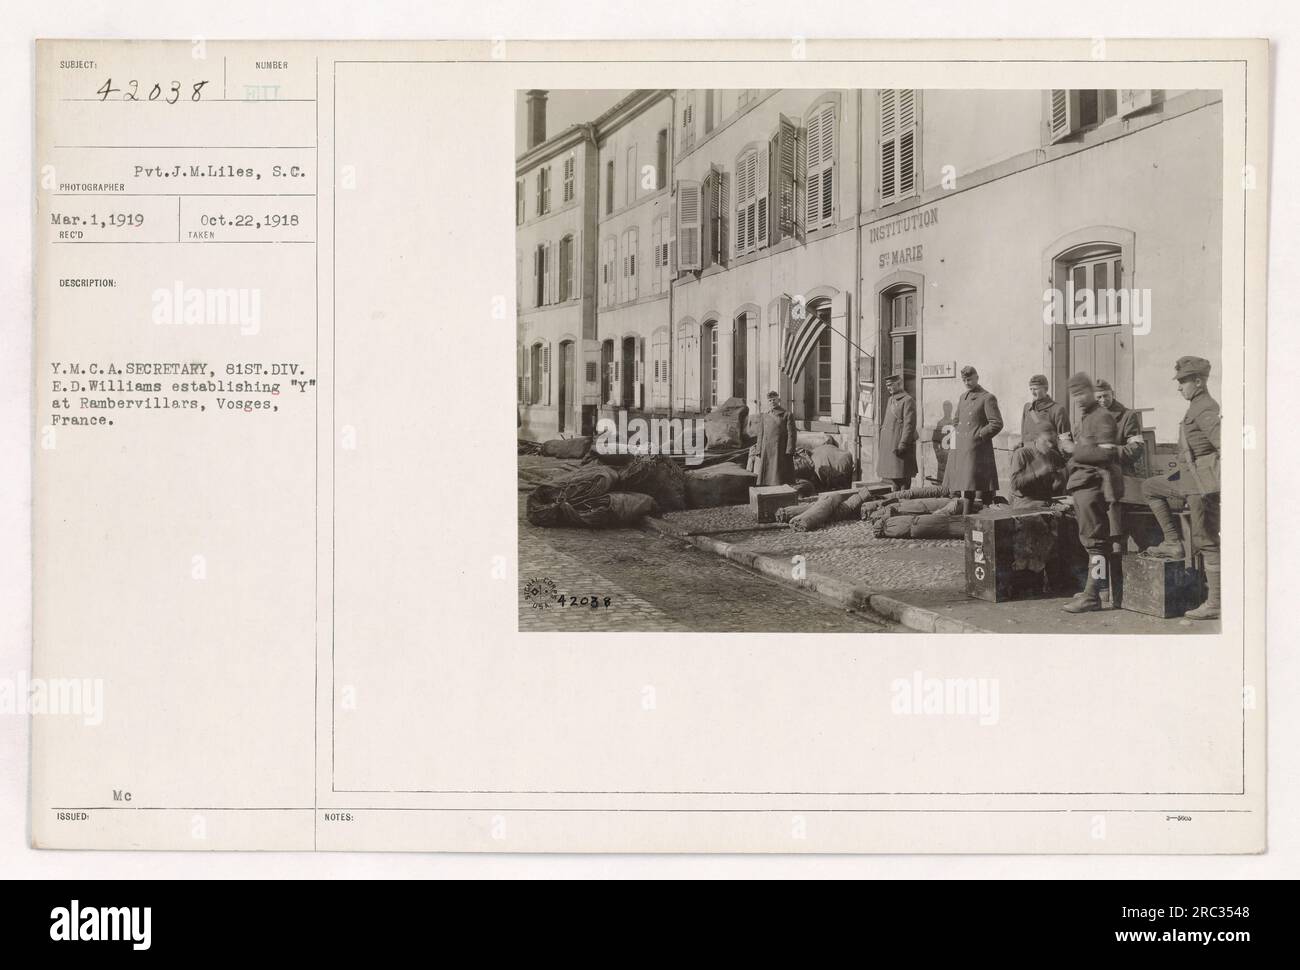 Private J.M. Liles of the Signal Corps is seen in this photograph from March 1, 1919. The image captures Y.M.C.A. Secretary E.D. Williams working to establish a 'Y' facility in Rambervillars, Vosges, France, for the 81st Division. Stock Photo